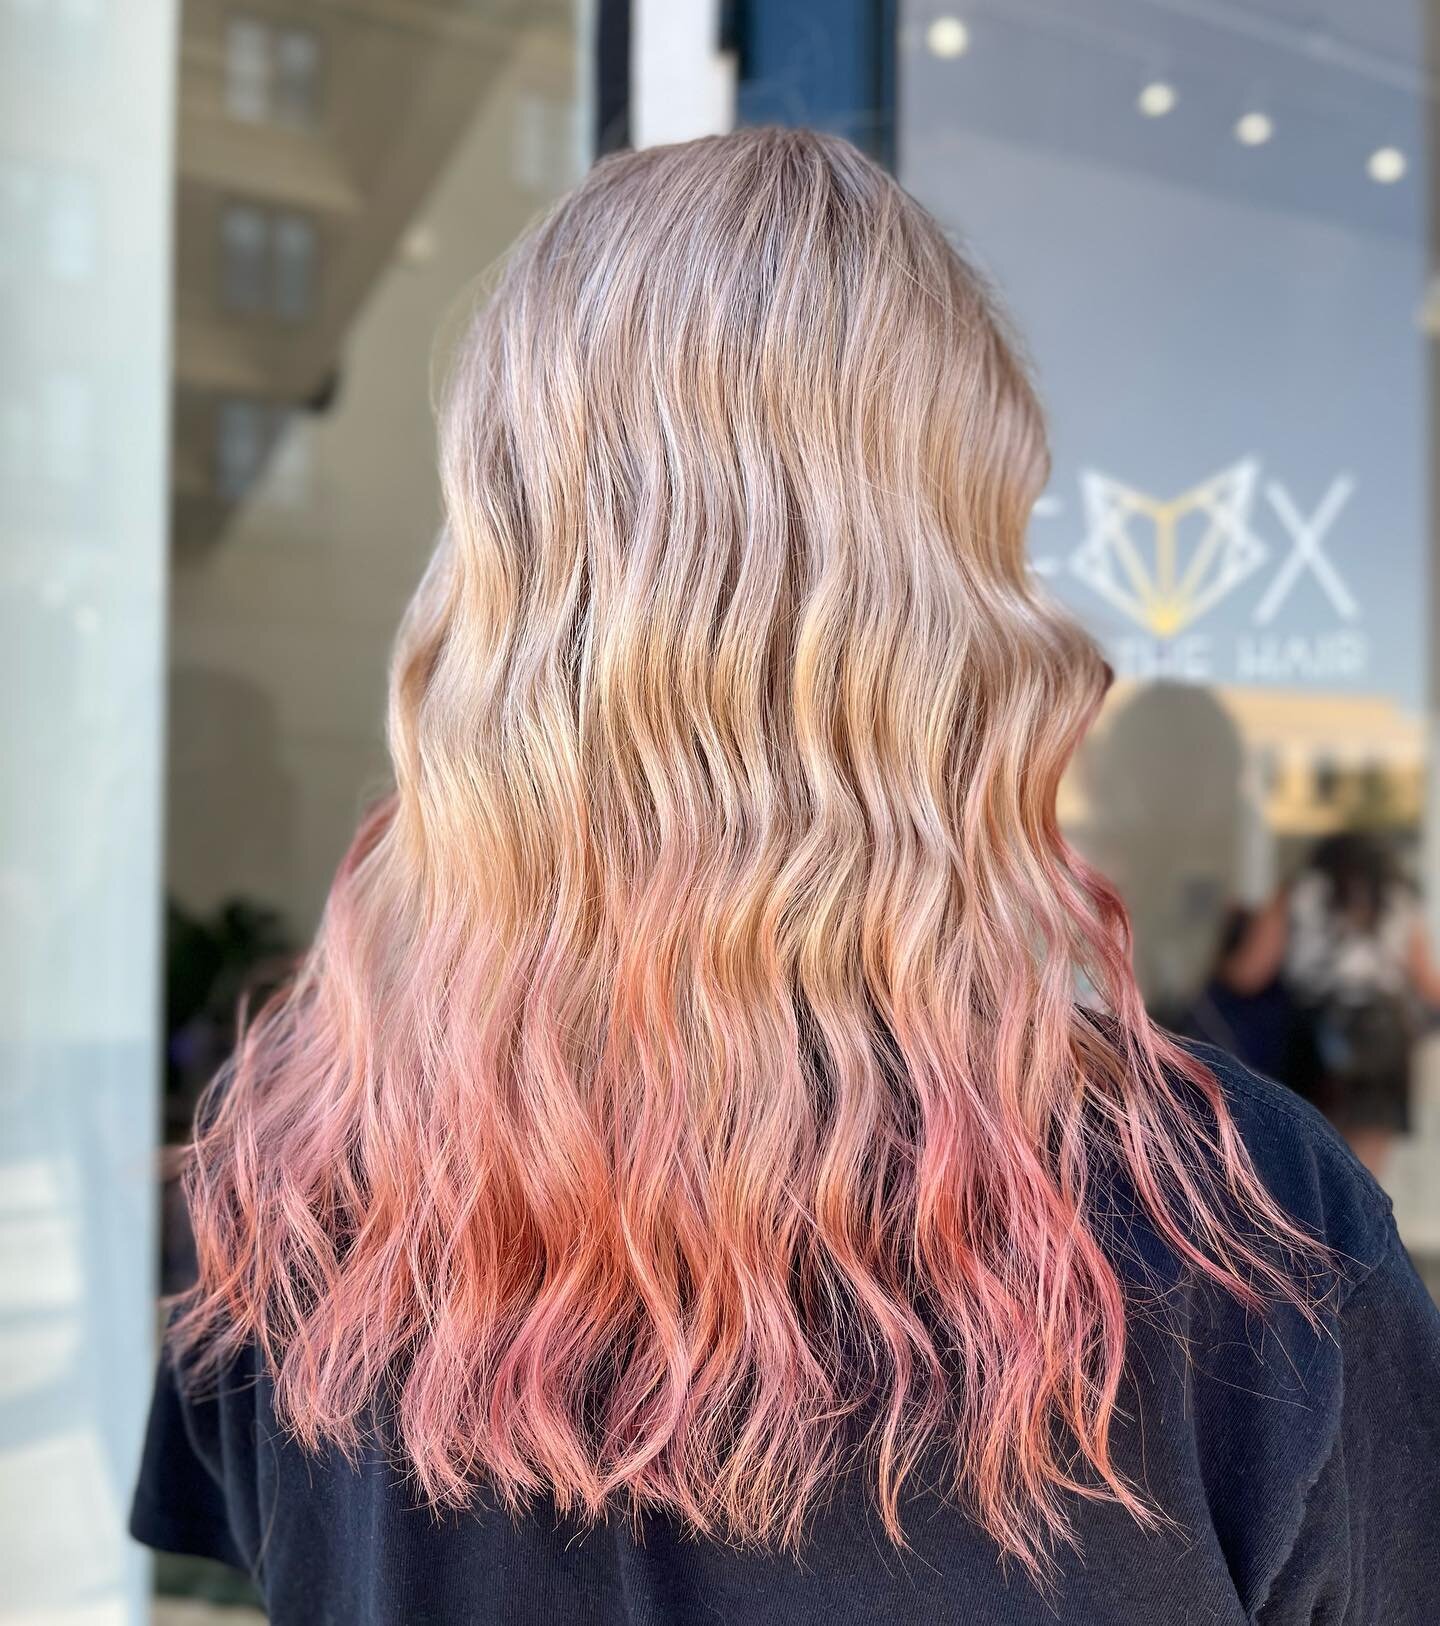 Blonde with &ldquo;dip dye&rdquo; 🌸 This project took me wayyyy back! Who remembers dip dye?!

Swipe for the before!

#foxandthehair #downtownpetaluma #petaluma #stylist #fullhighlight #highlights #dipdye #dipdyehair #rosegold #pulpriot #pulpriothai